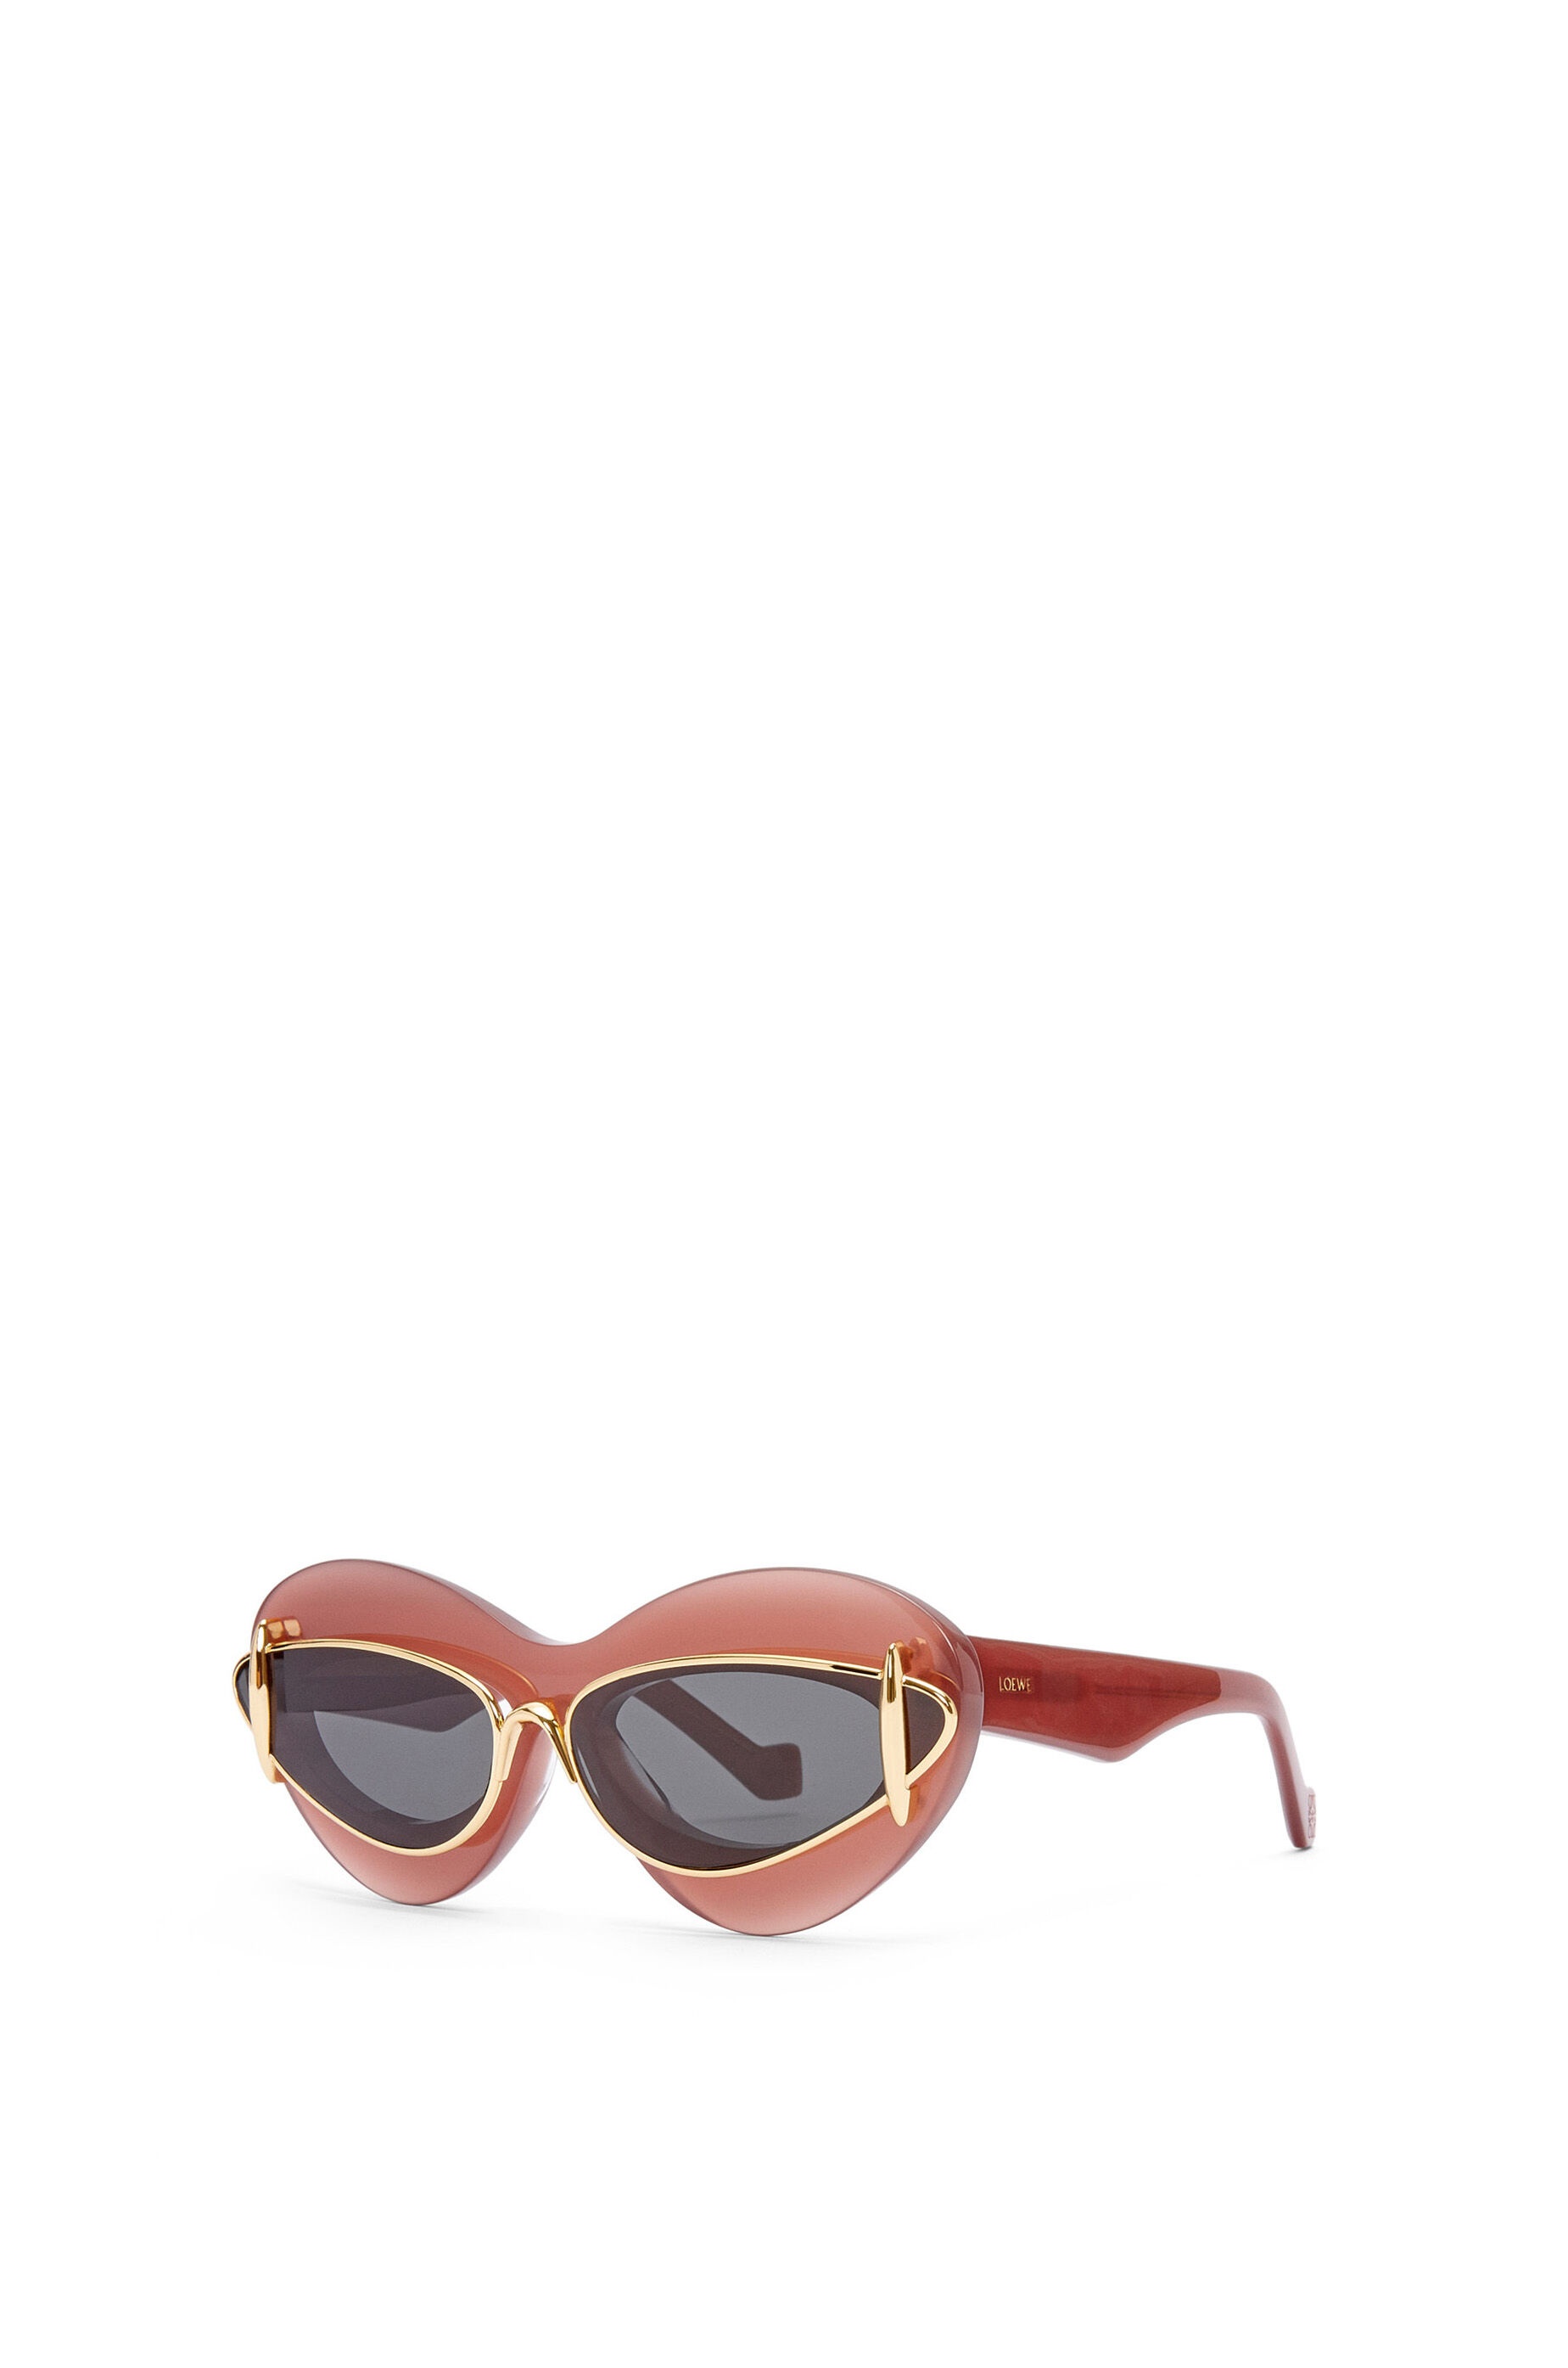 Cateye double frame sunglasses in acetate and metal - 2